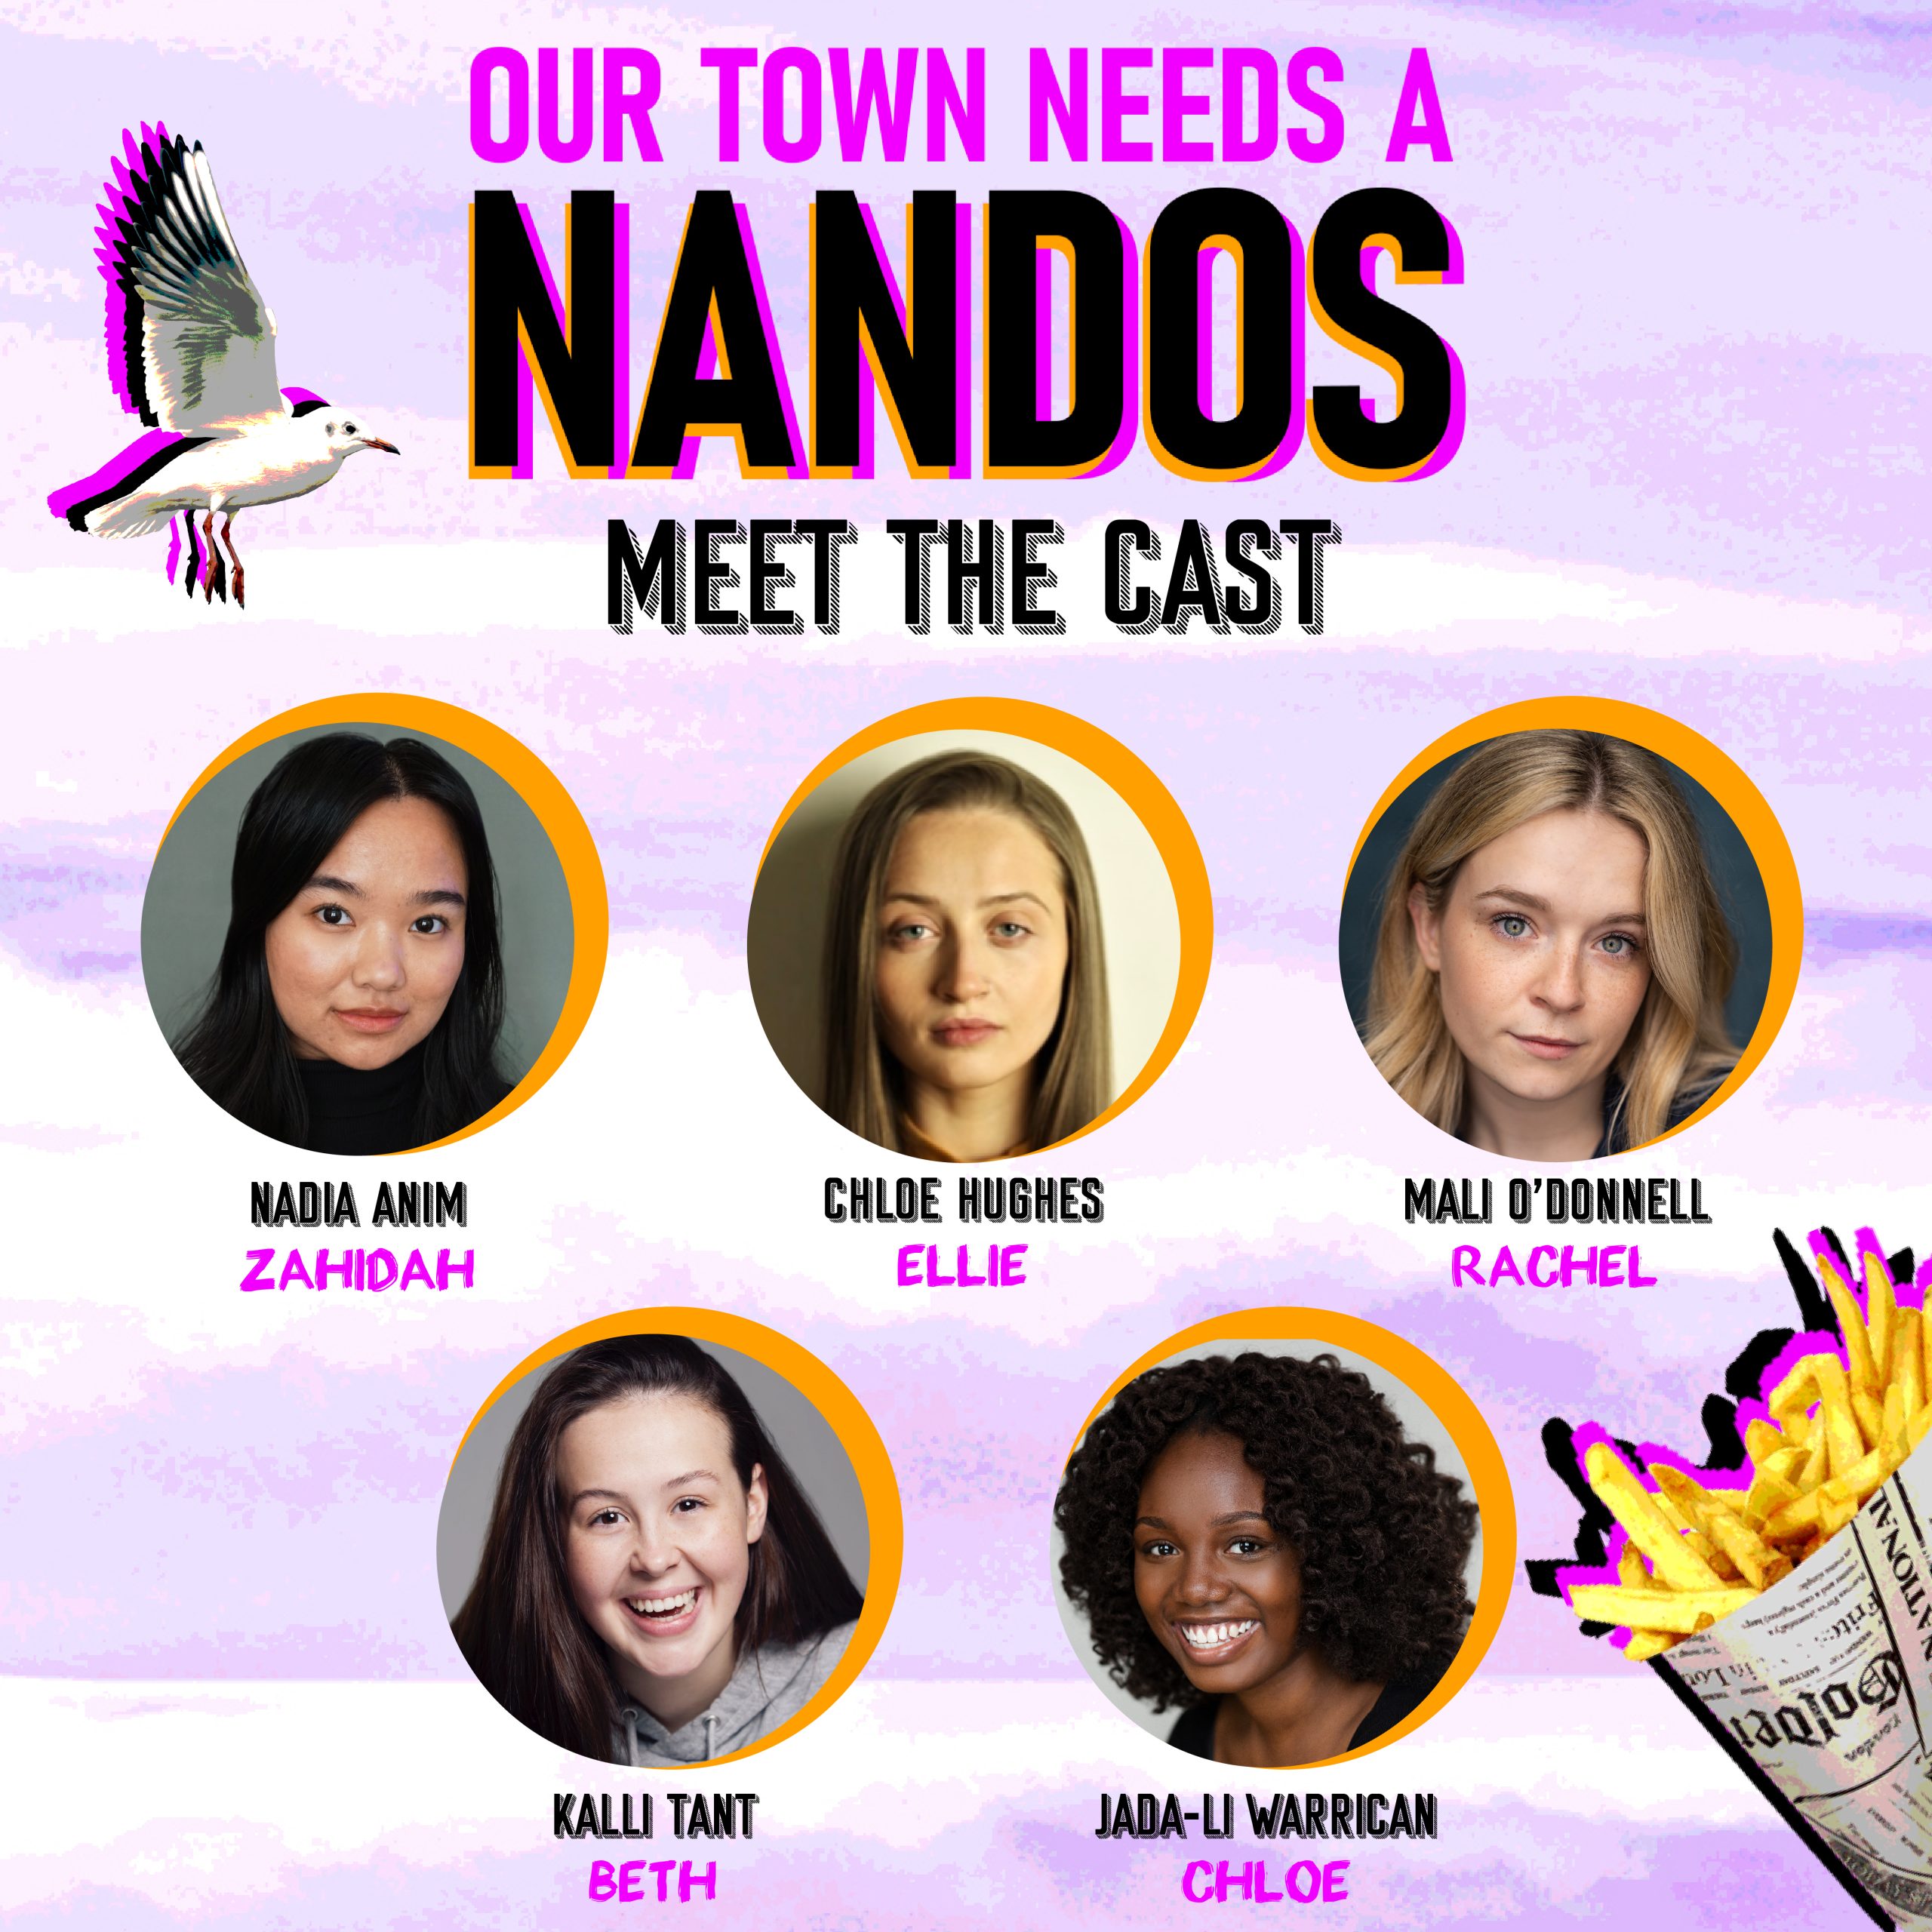 The main cast of Our Town Needs a Nandos. Top row from left to right: Nadia Anim, Chloe Hughes, Mali O'Donnell. Bottom row from left to right: Kalli Tant, Jada-Li Warrican. 